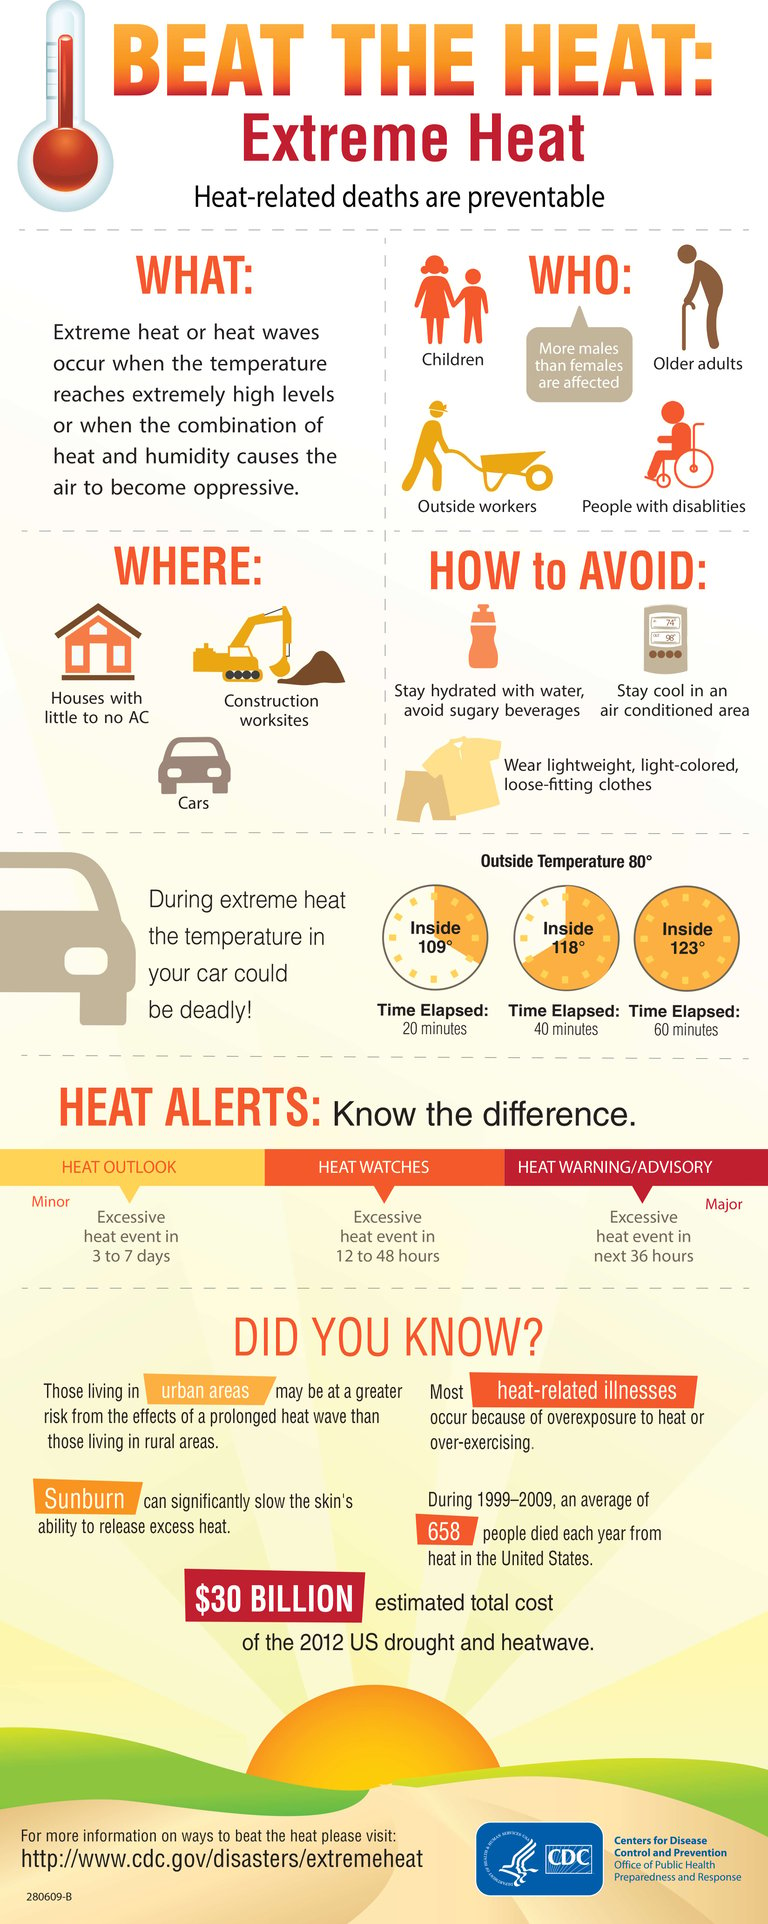 Enfield Fire Rescue Offers Hot Weather Safety Tips Ahead of Potential Heat Wave